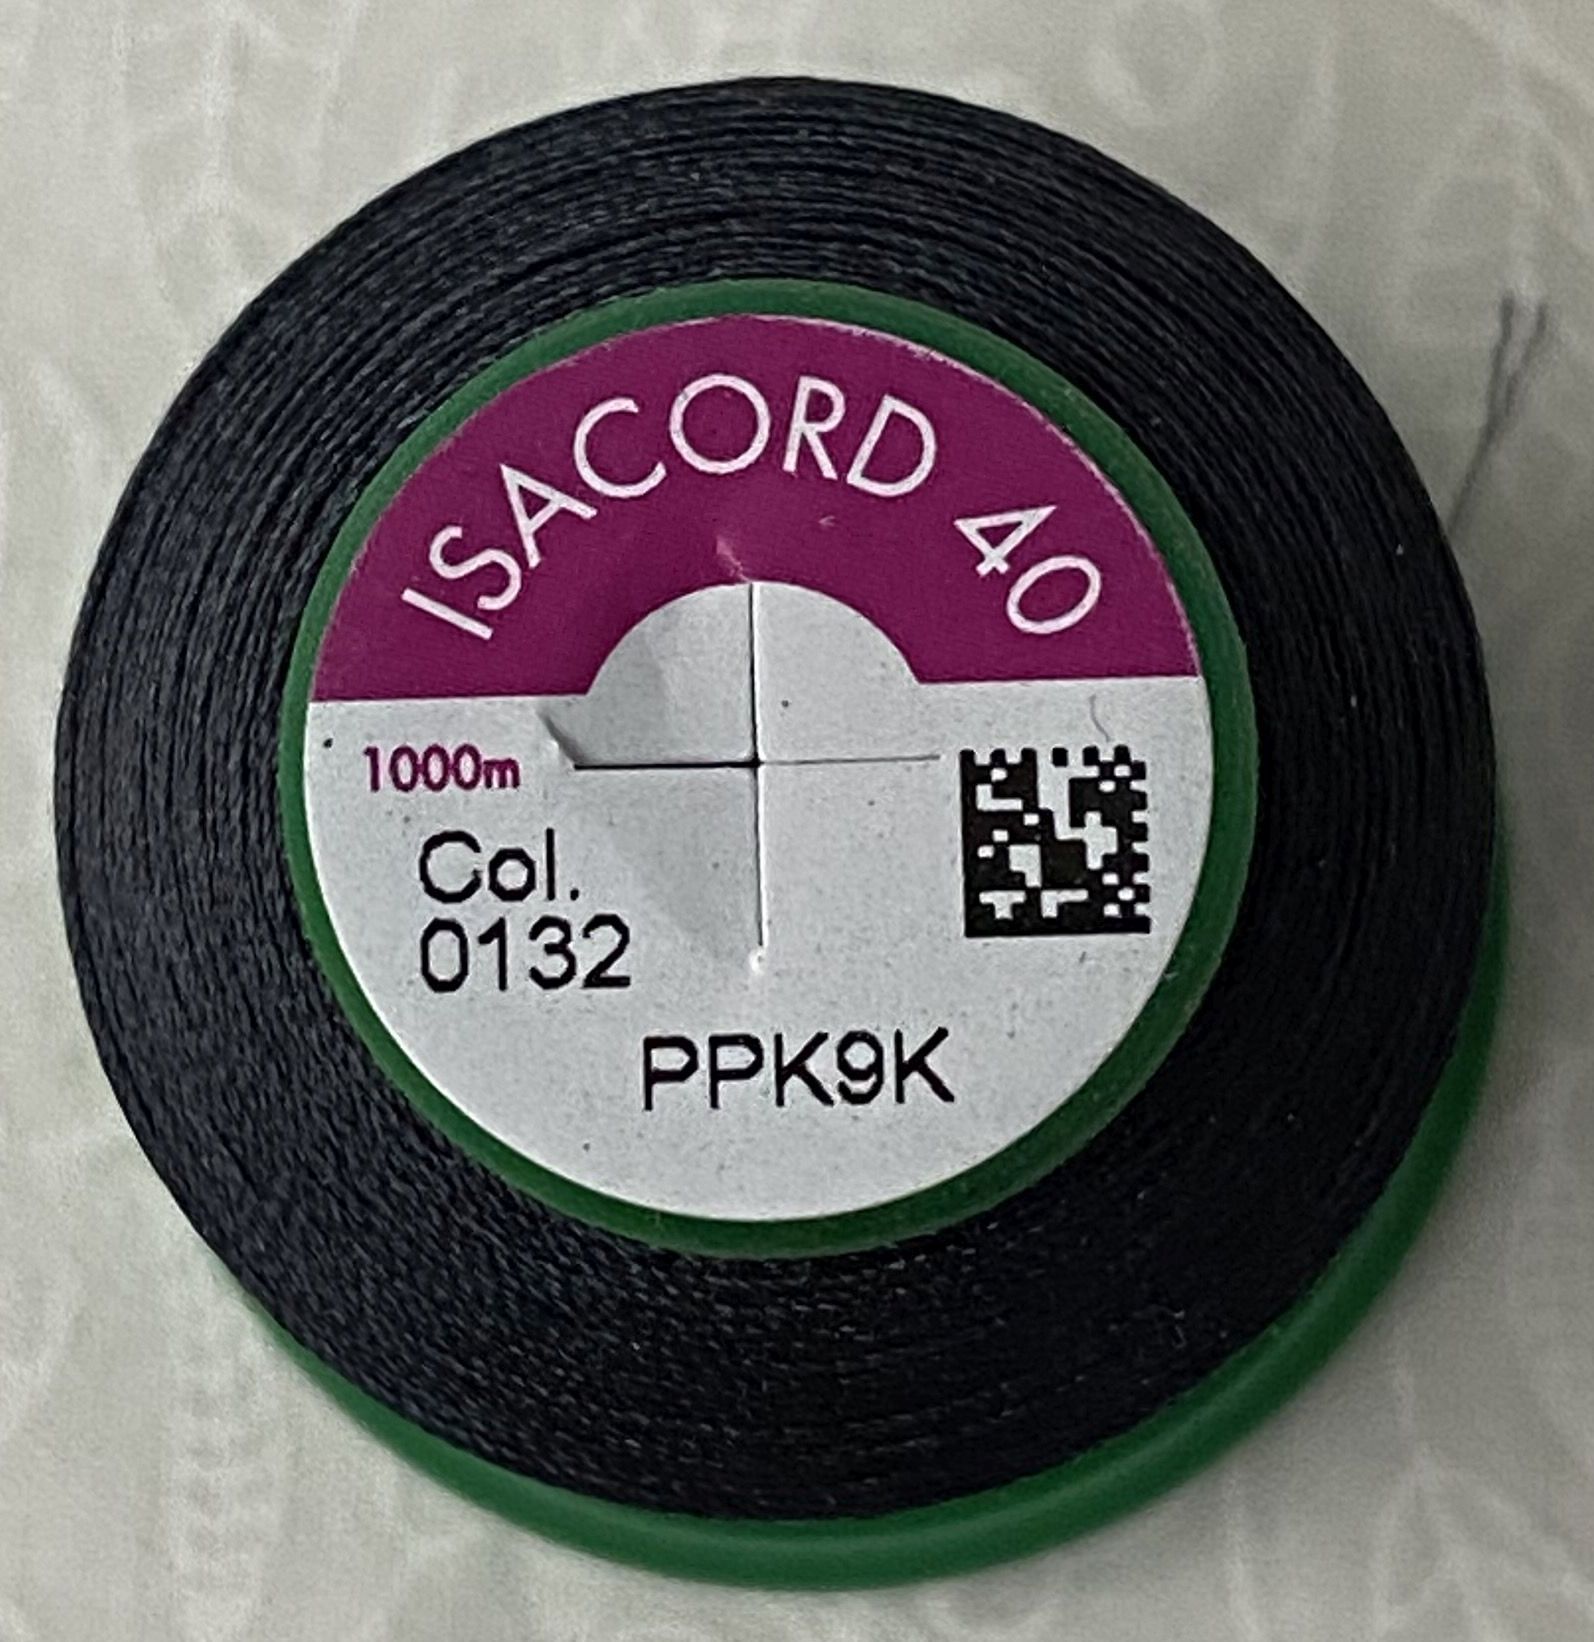 Isacord Thread 5000m-Midnight 3344 – Quilters Apothecary